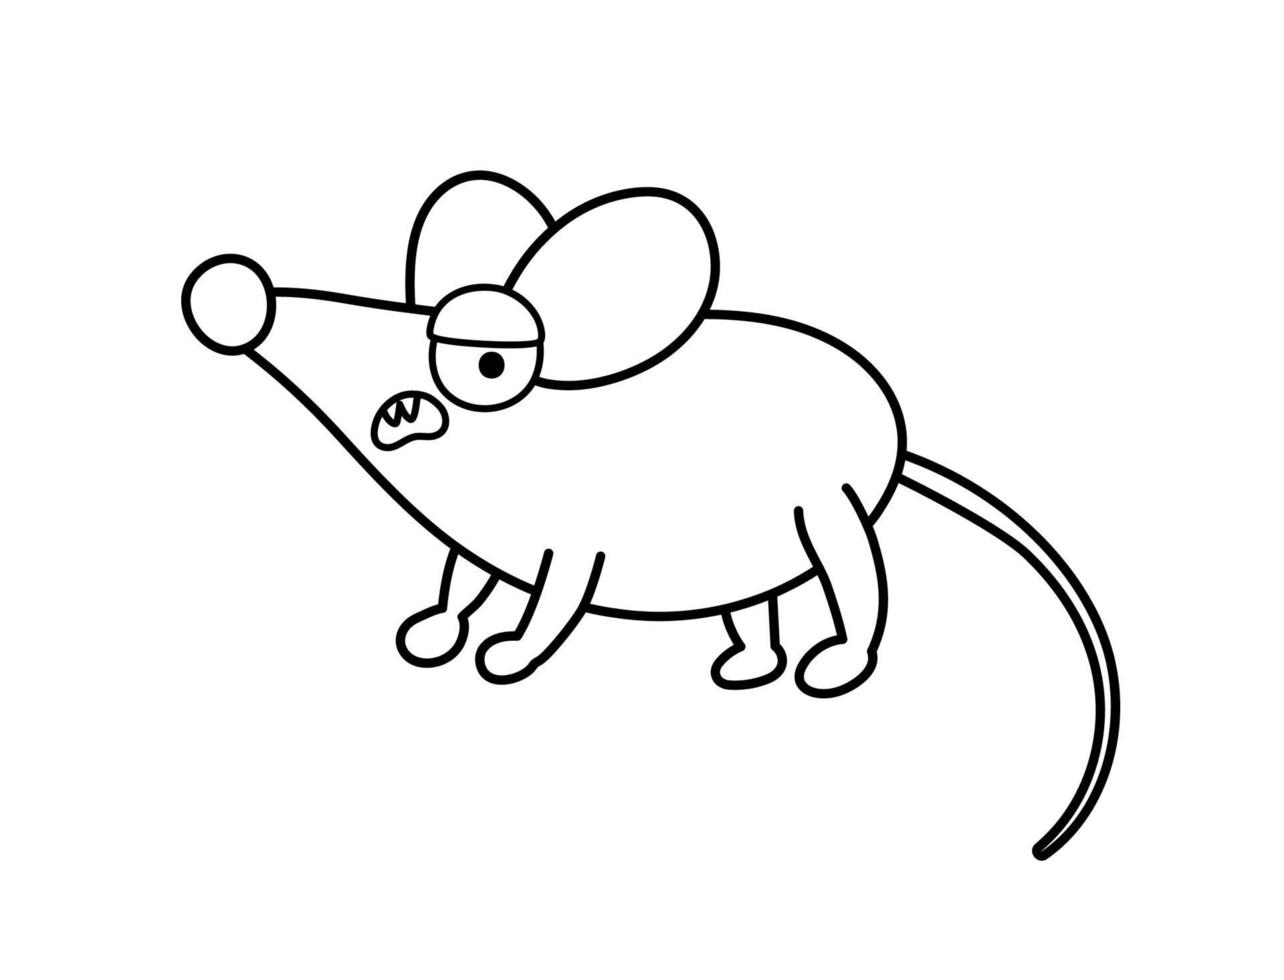 Cute vector black and white angry mouse. Halloween character icon. Funny autumn all saints eve illustration with scary animal. Samhain party coloring page for kids.